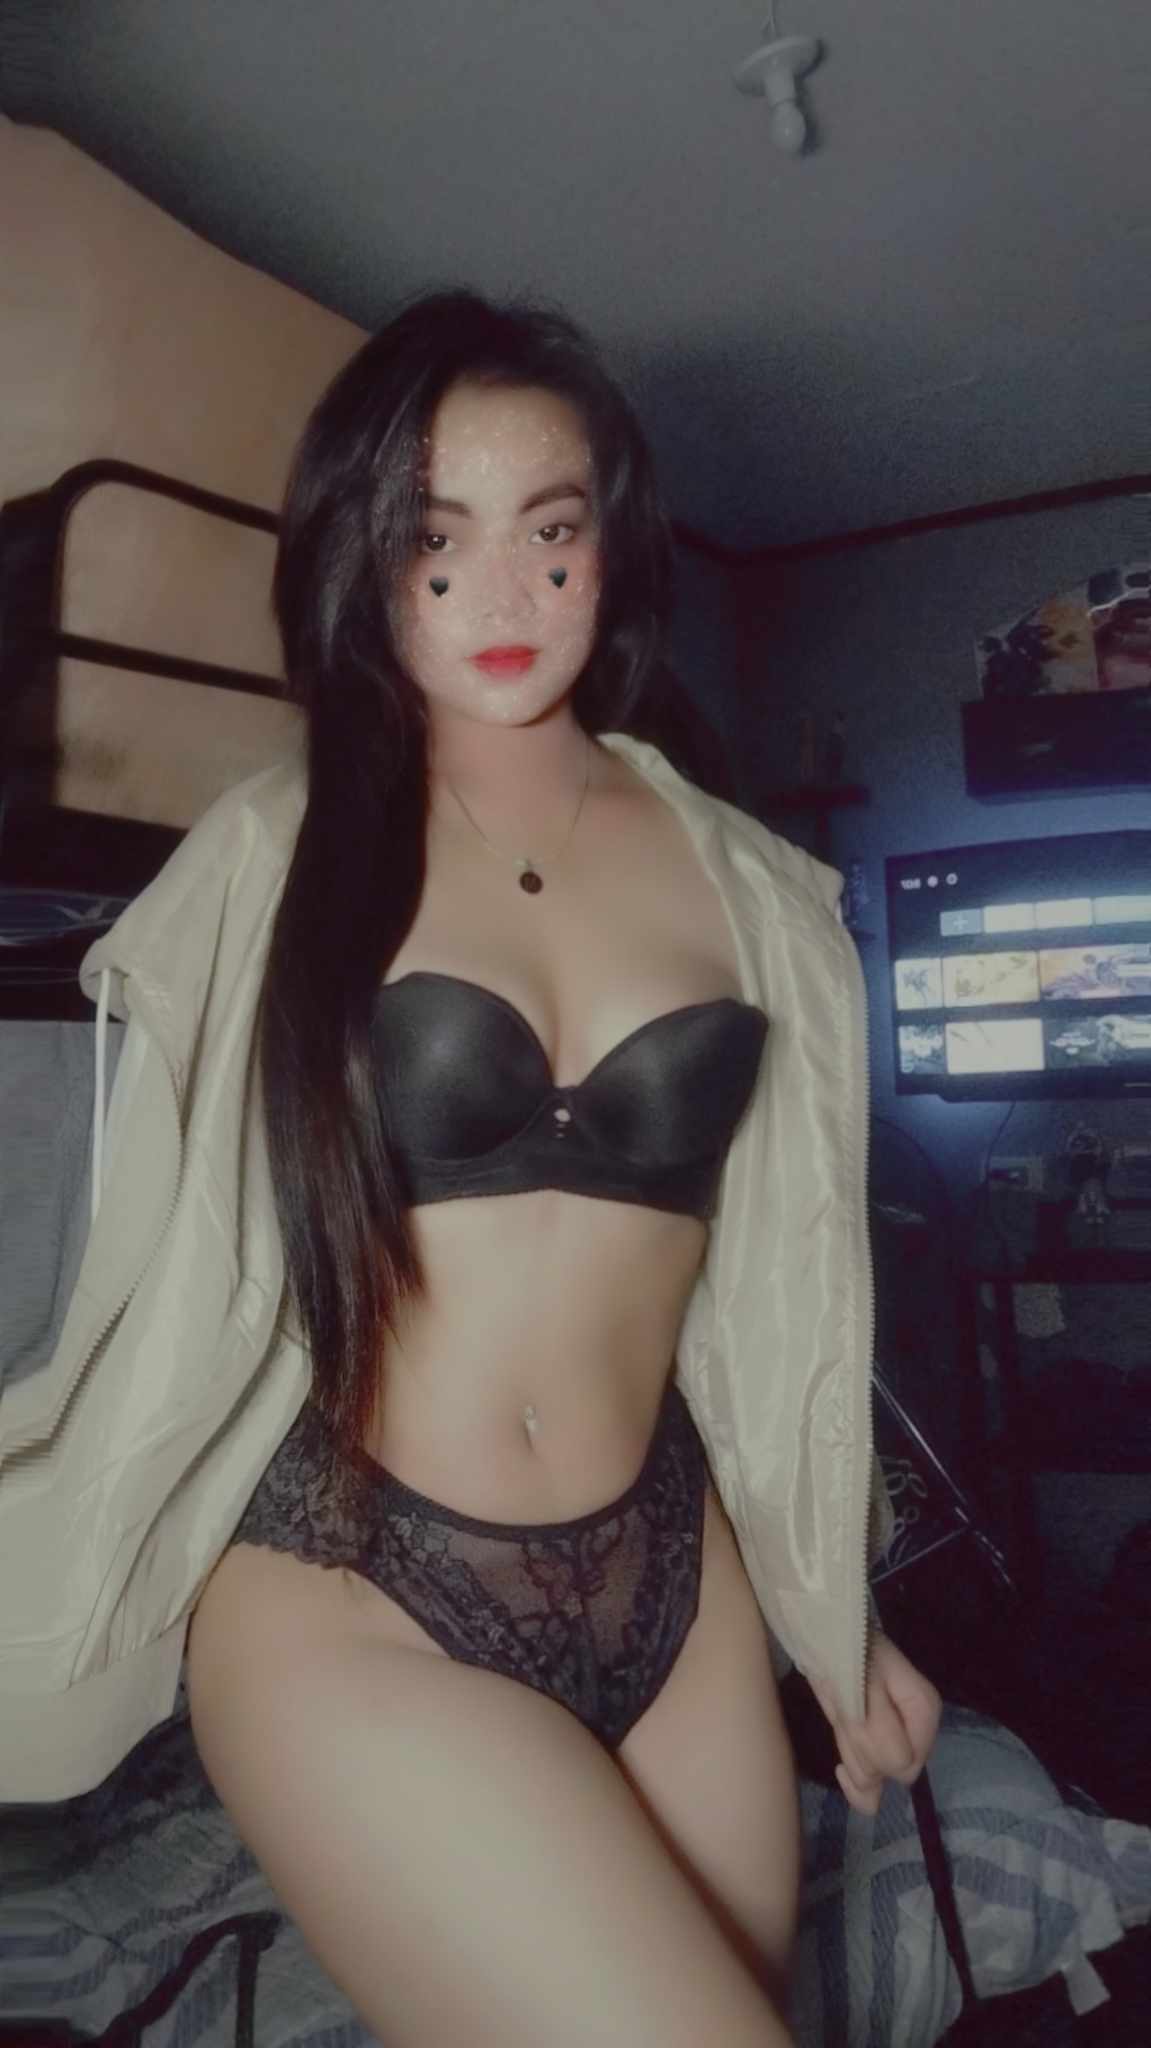 Costum Video Pics Live show 🫰 🍑 I can Be your slave or mistress 🥒 squirt 🍒 Joi anal cei Snap me kylie_bell88 skype ferly.samonte telegram @krisha1994 kik asiansexyslave